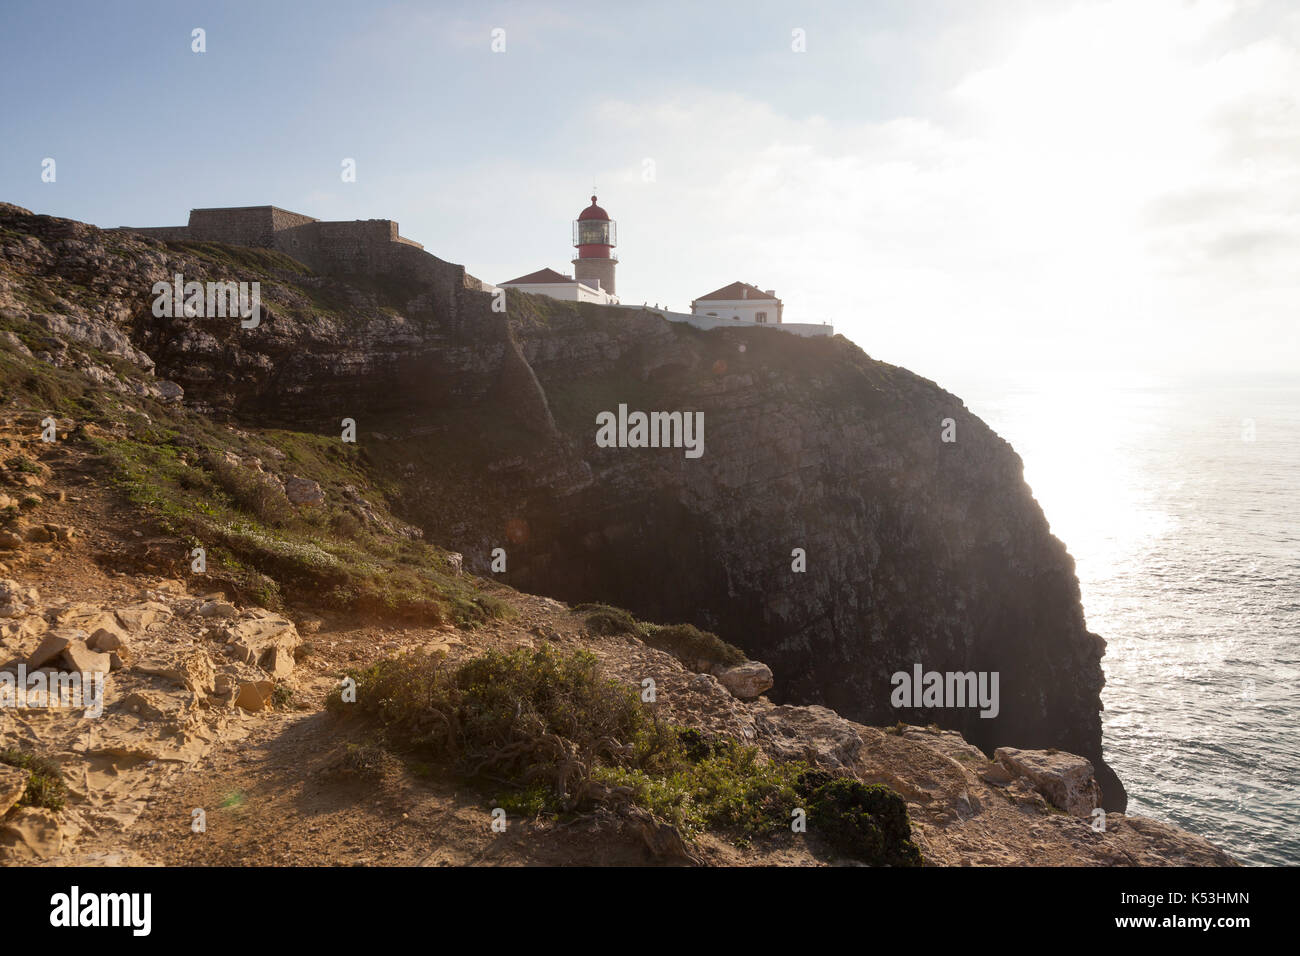 Cape St. Vincent, Portugal: Cape St. Vincent Lighthouse at sunset. The cape is the southwestern most point in Portugal and continental Europe. Stock Photo